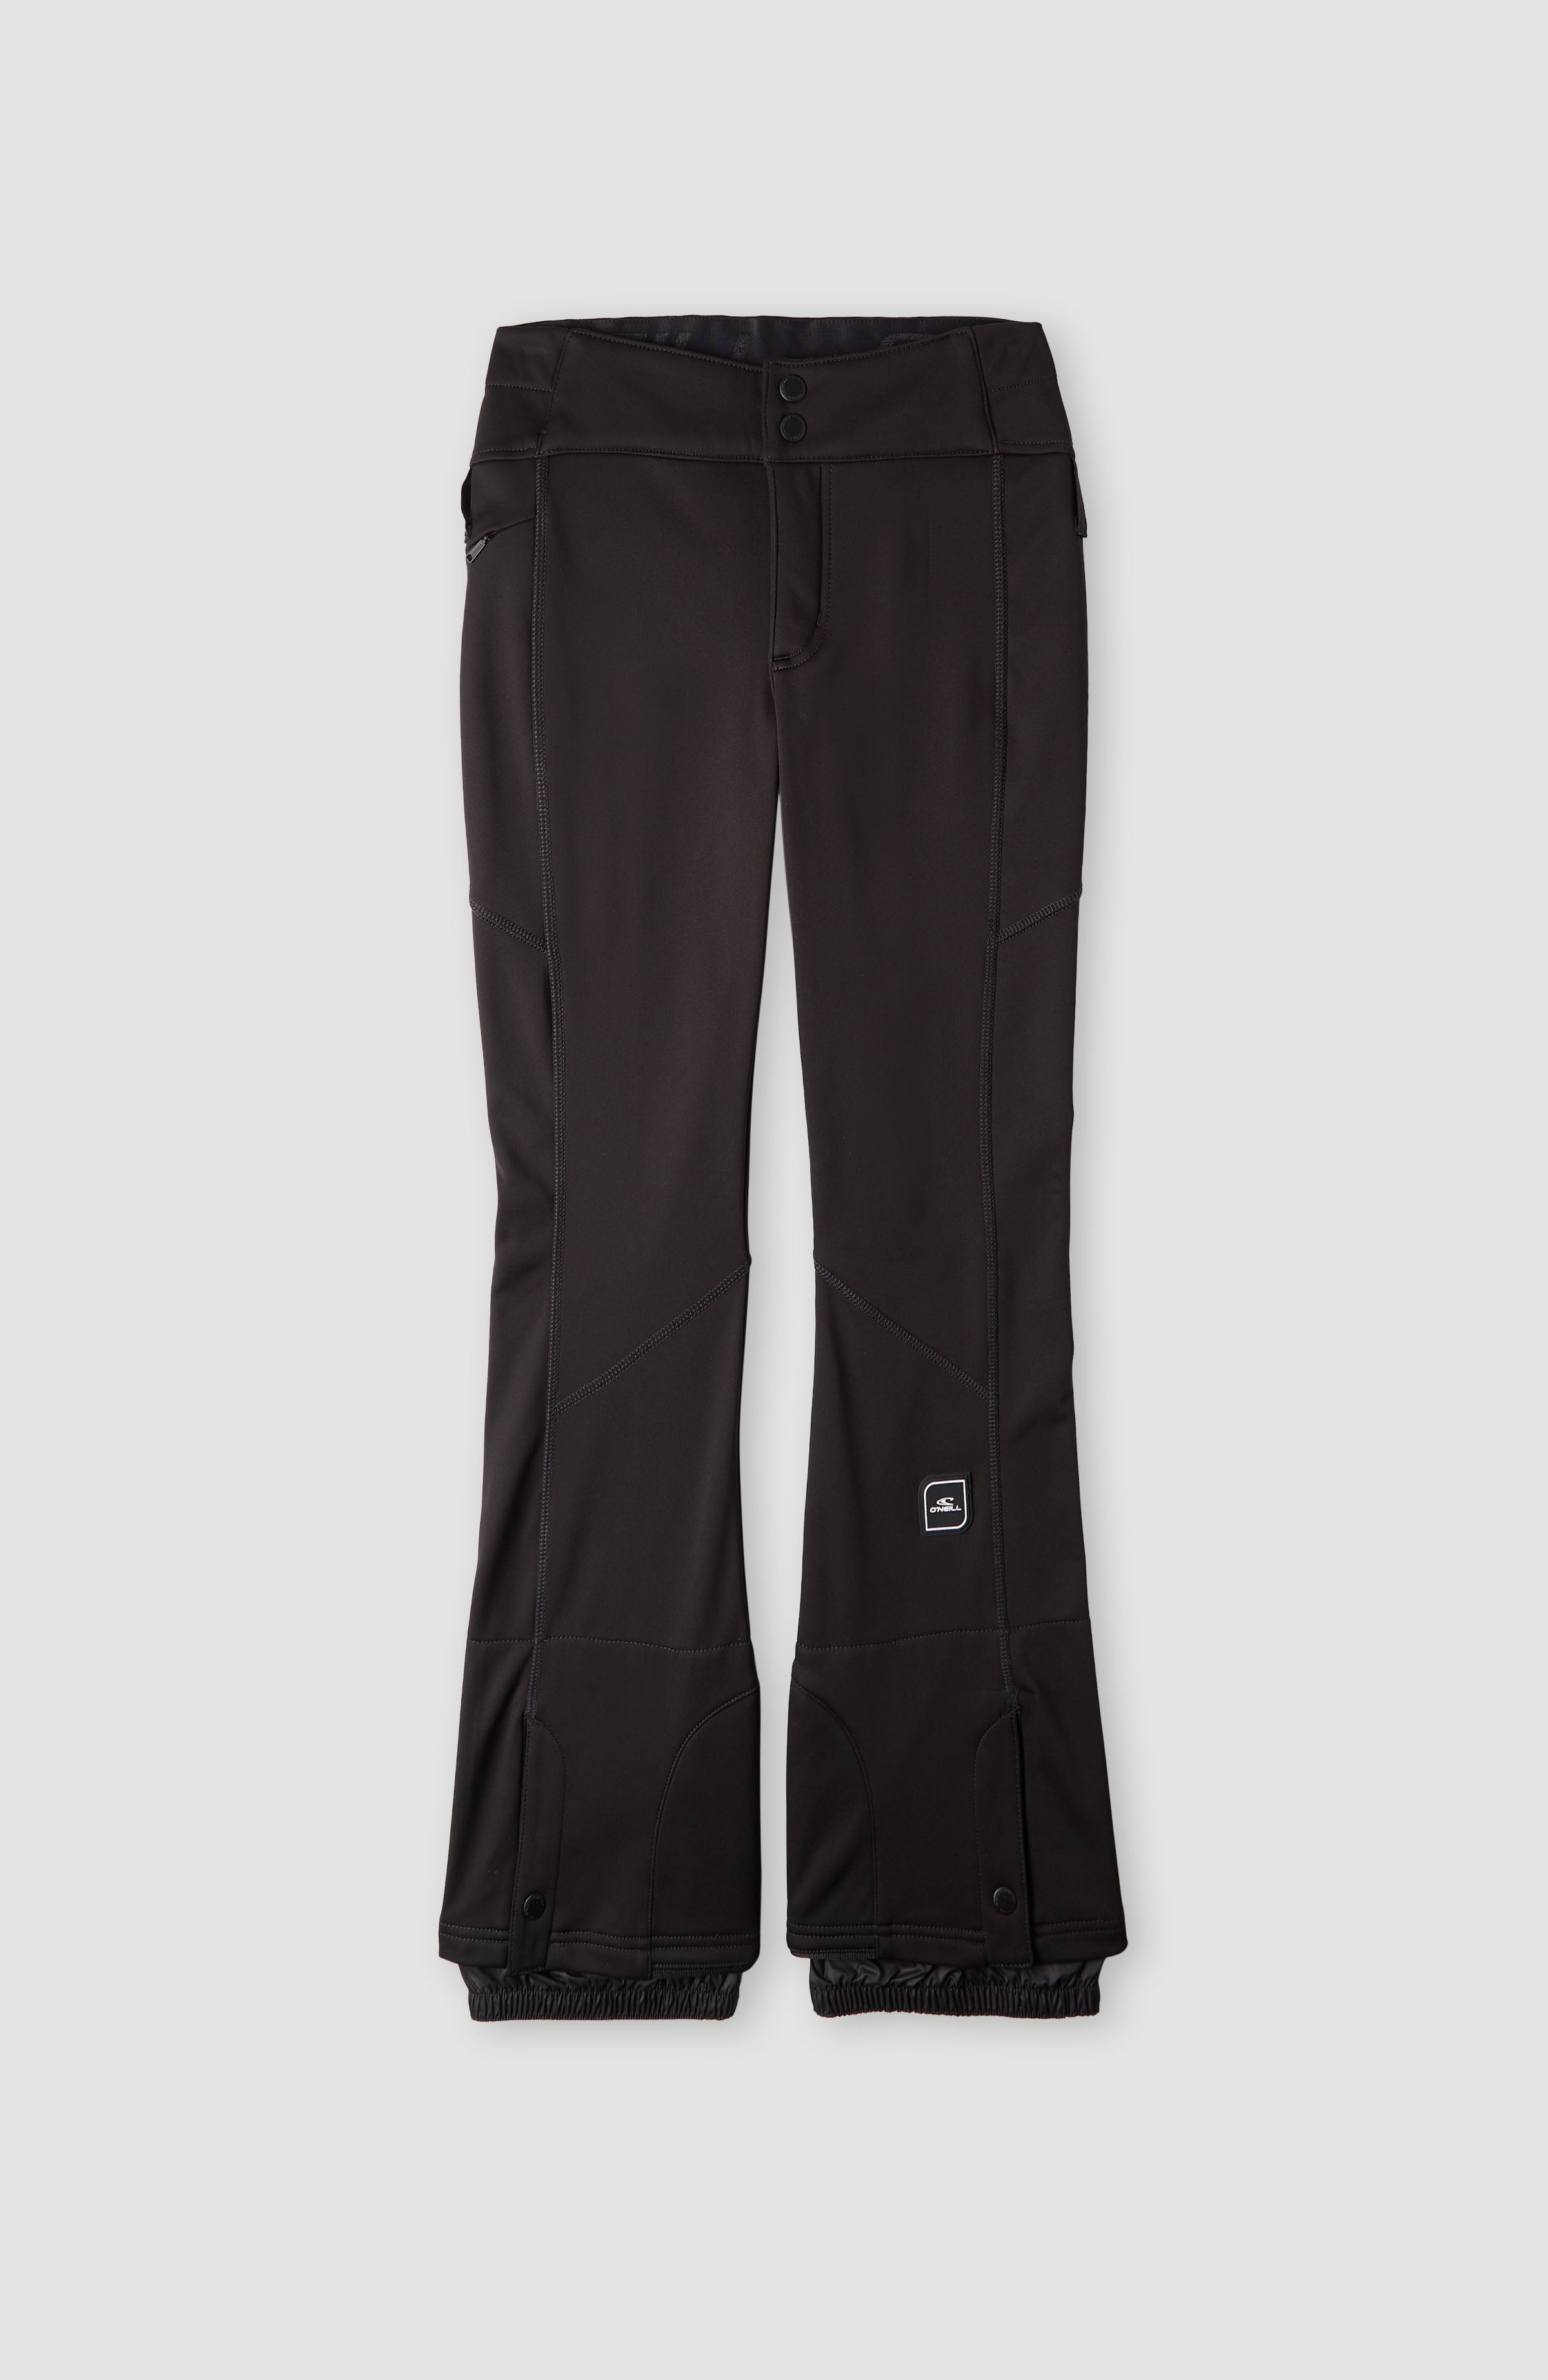 Ski and snowboard pants for Girls